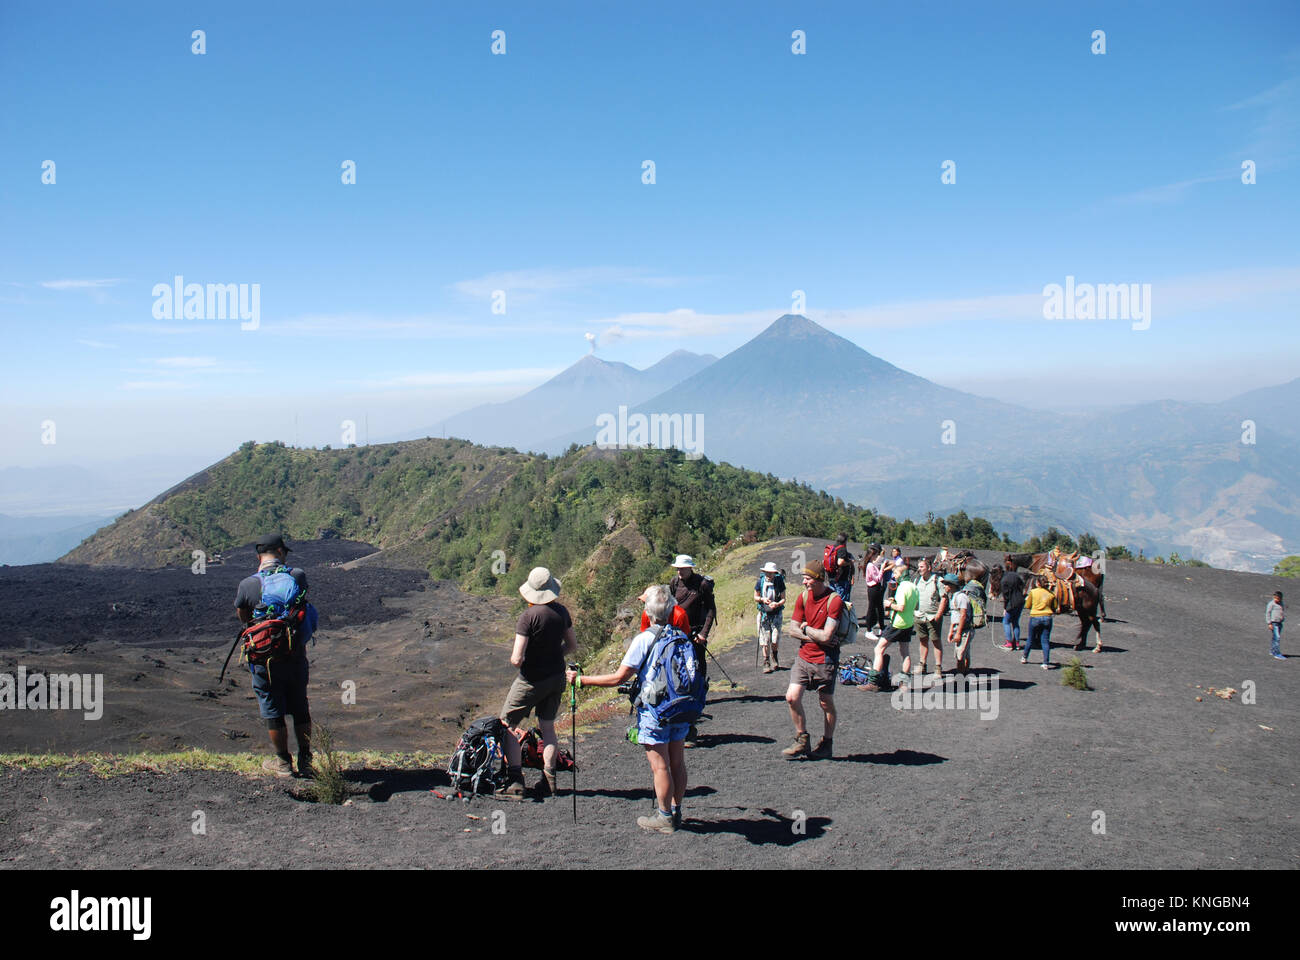 trekkers on the active volcano of Pacaya in Guatemala with Agua and Fuego volcanoes in the background Stock Photo